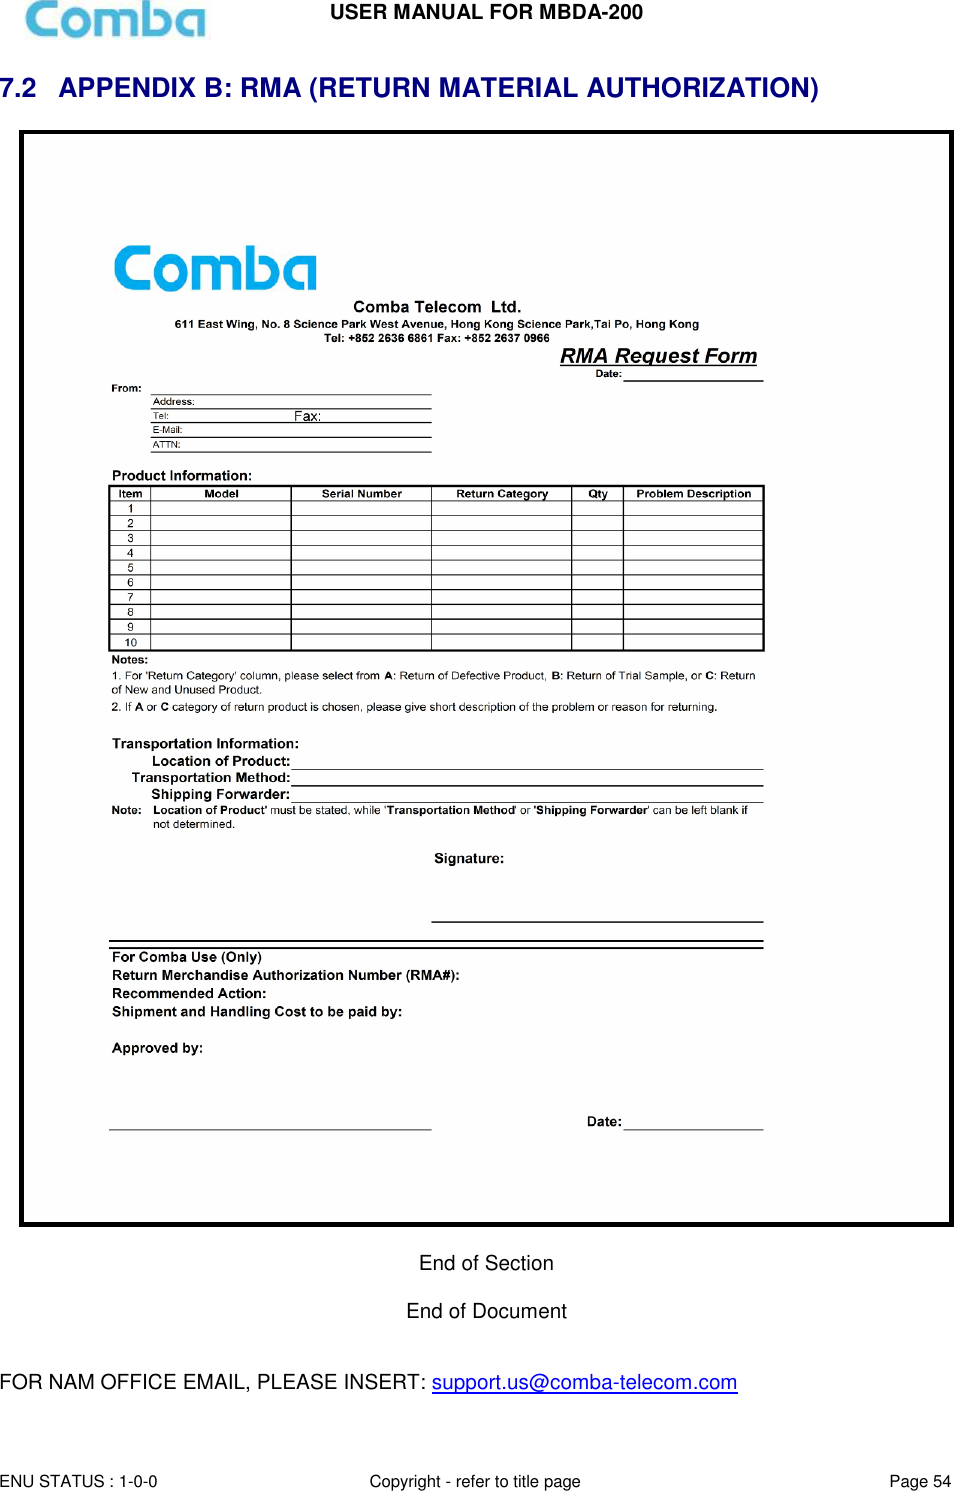 USER MANUAL FOR MBDA-200  ENU STATUS : 1-0-0 Copyright - refer to title page Page 54     7.2  APPENDIX B: RMA (RETURN MATERIAL AUTHORIZATION)   End of Section  End of Document   FOR NAM OFFICE EMAIL, PLEASE INSERT: support.us@comba-telecom.com 